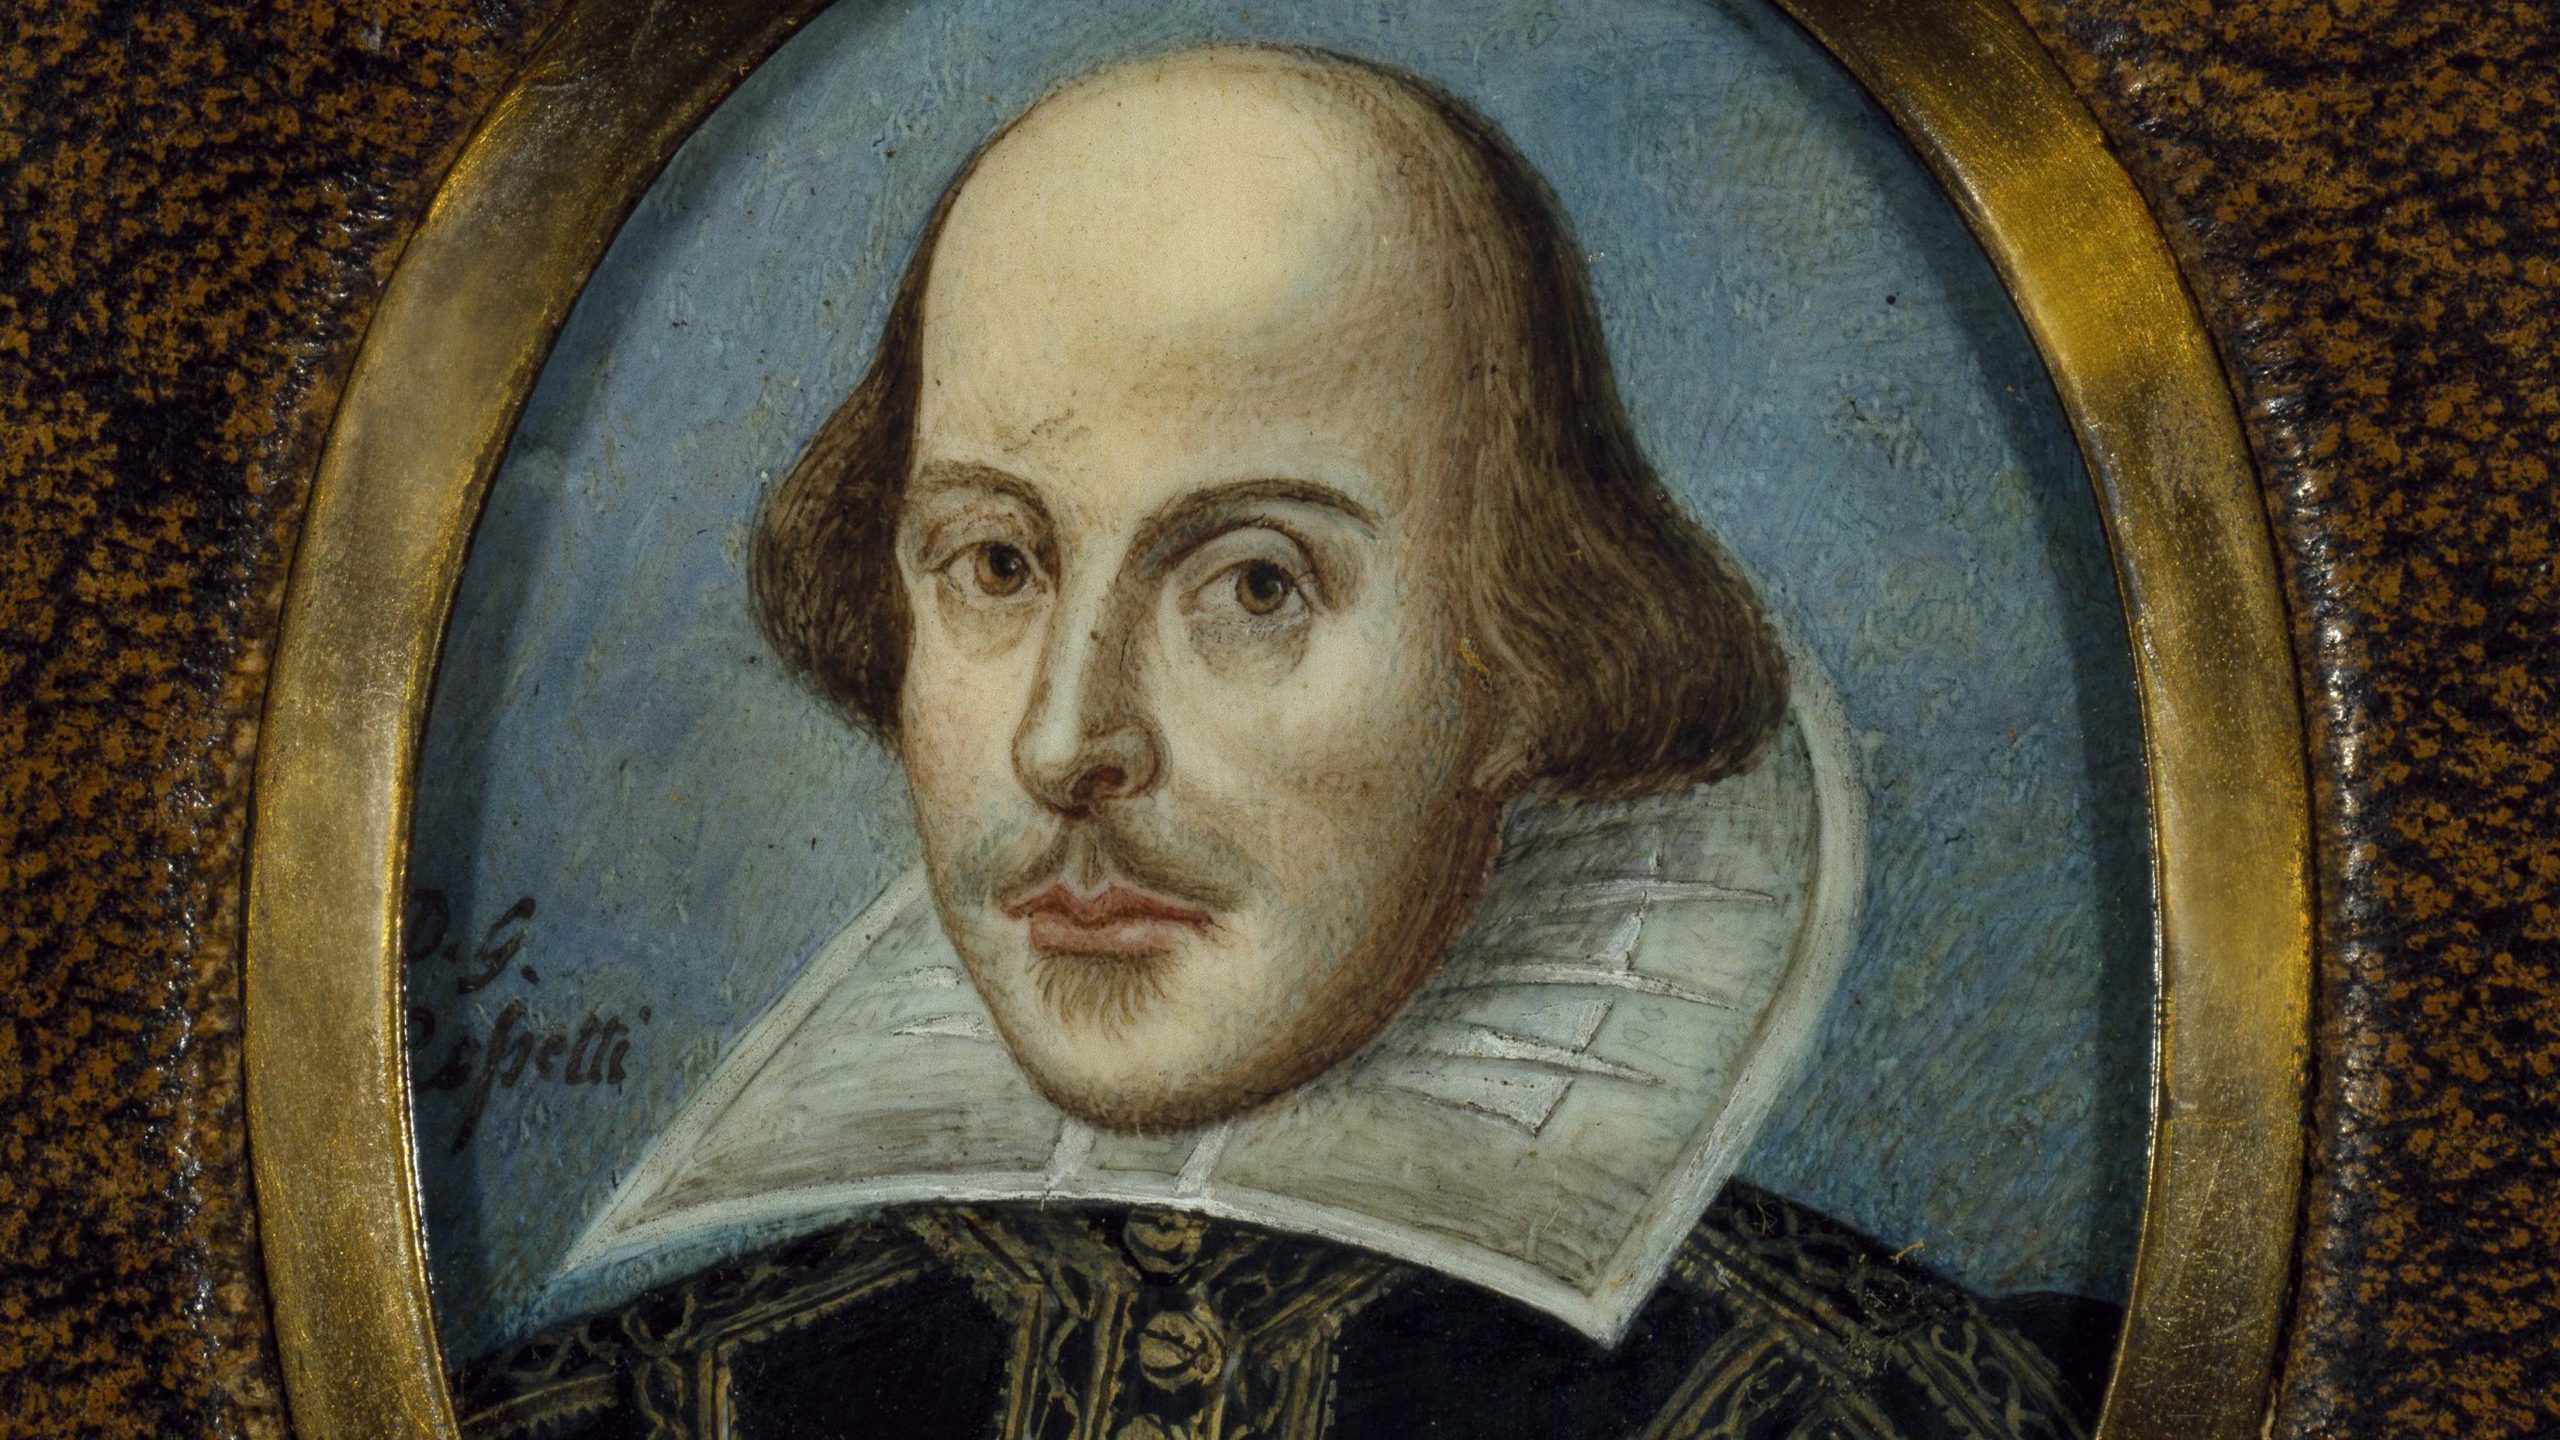 24 interesting facts about William Shakespeare